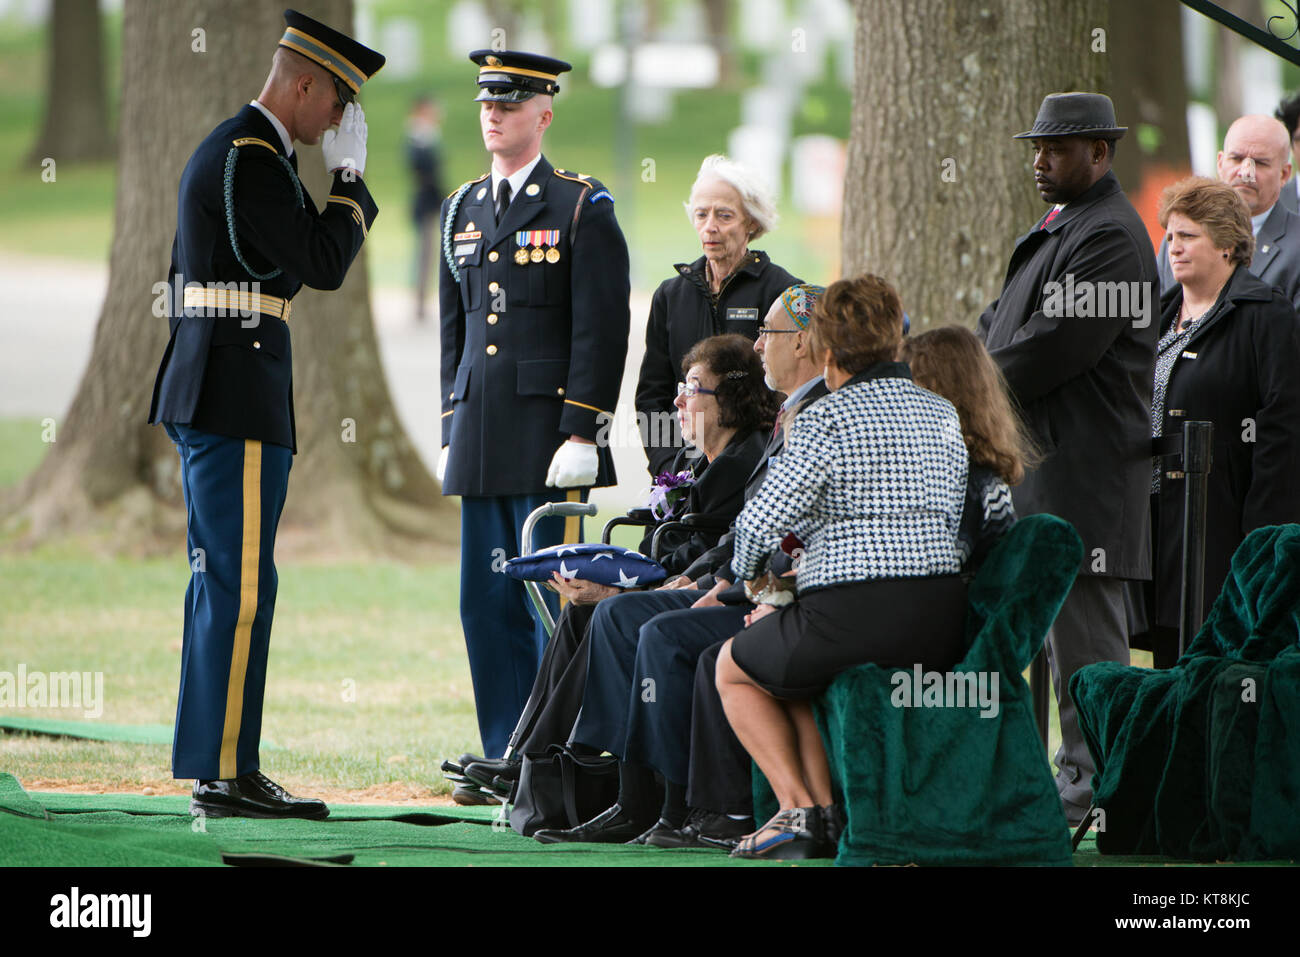 Harriet Lichtcsien-Margolis receives the American flag during the graveside service for her cousin U.S. Army Air Forces 2nd Lt. Marvin B. Rothman, 21, of Cleveland Heights, Ohio, at Arlington National Cemetery, April 19, 2017, in Arlington, Va. Rothman went missing during a bombing escort mission, April 11, 1944, flying a P-47D Thunderbolt over New Guinea. His remains were recently found and identified. (U.S. Army photo by Rachel Larue/Arlington National Cemetery/released) Stock Photo